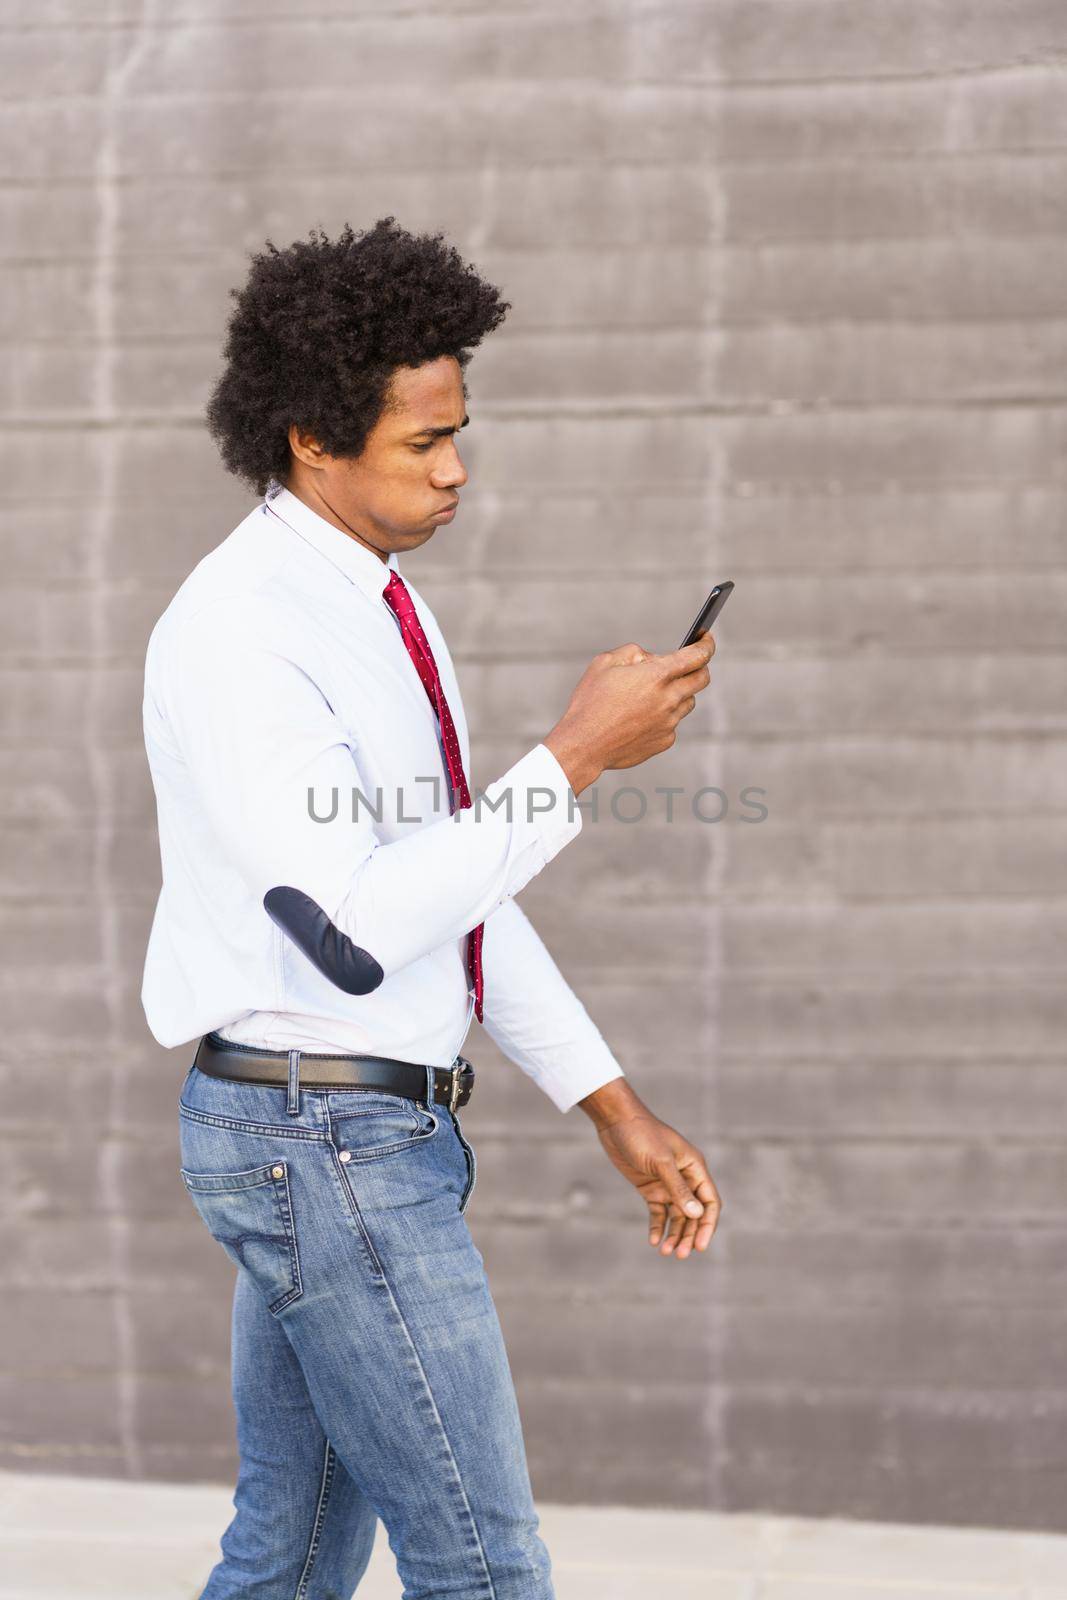 Concerned Black Businessman using his smartphone walking down the street.